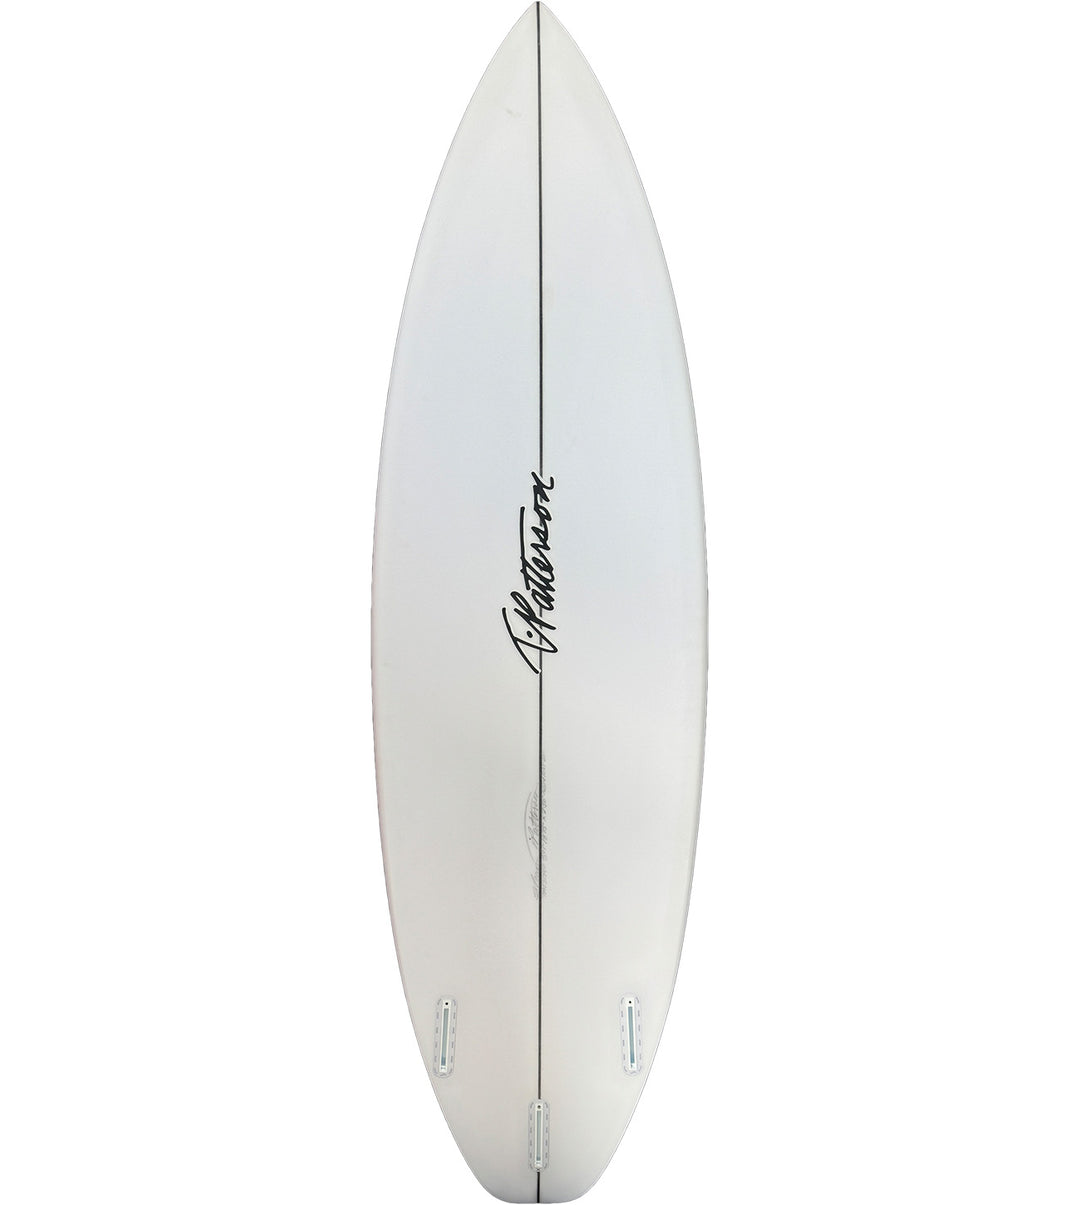 TPatterson Surfboard
Alley Rat/Futures 5'11 #TPS231342